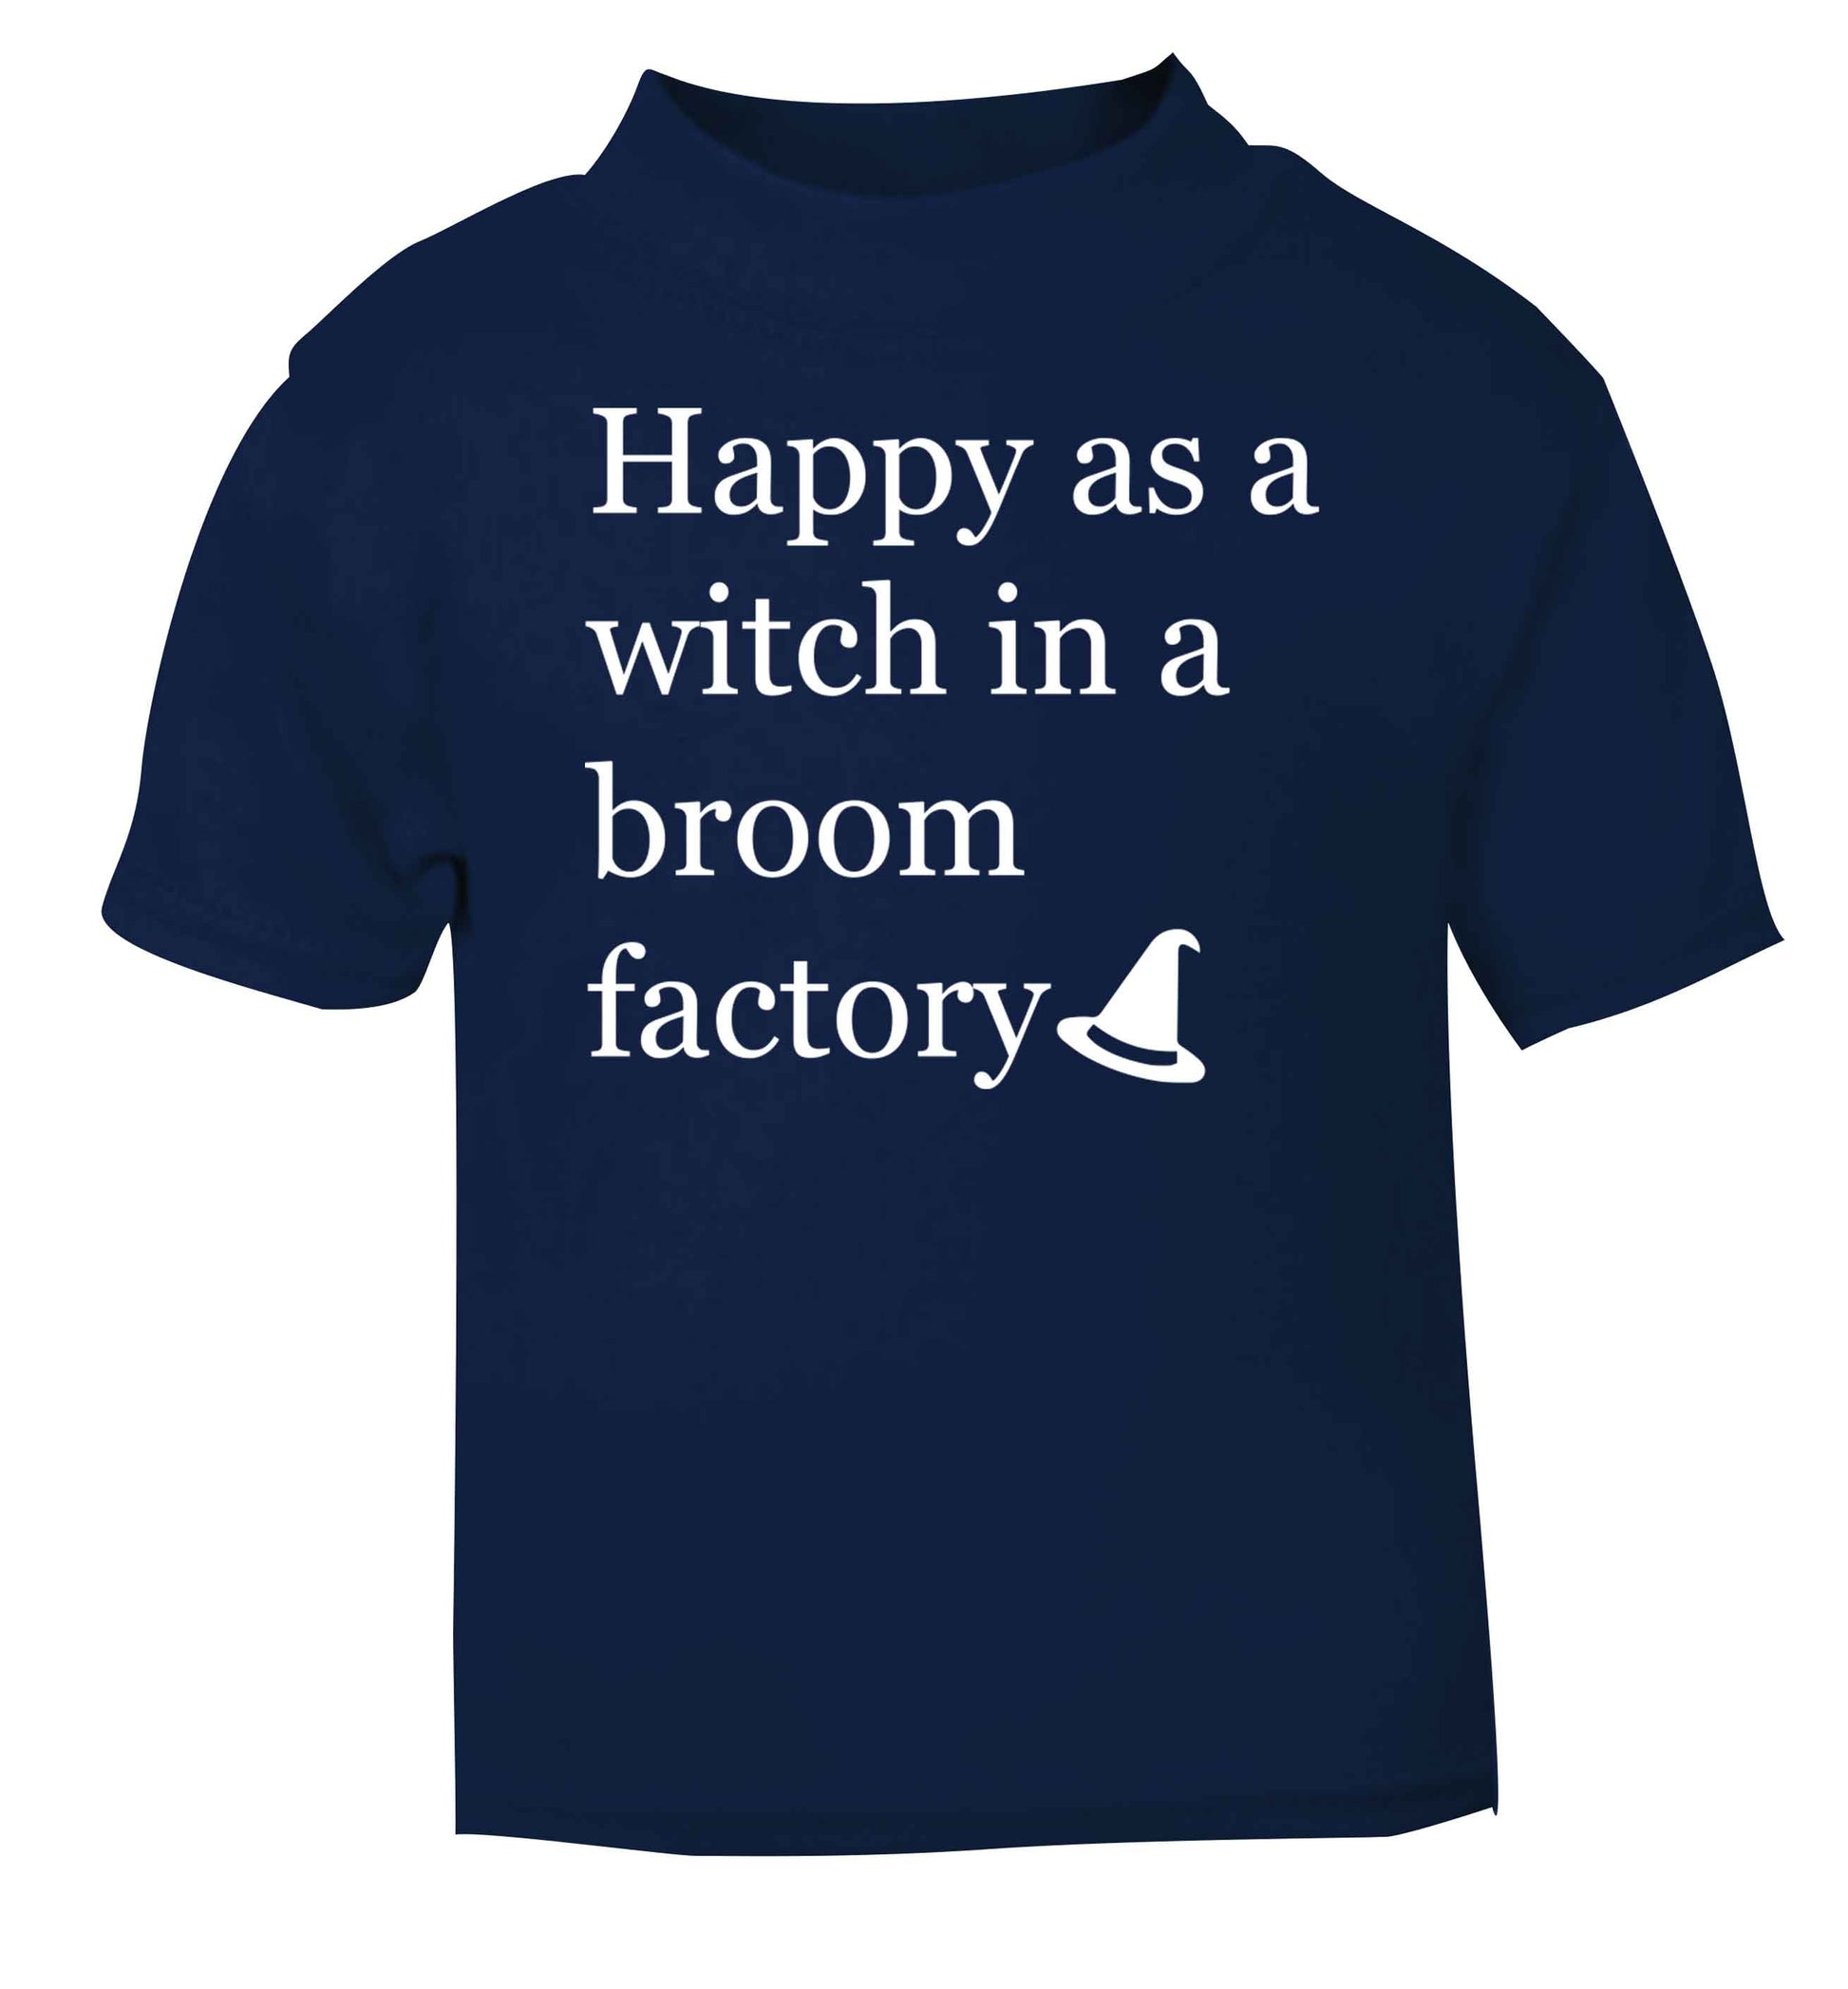 Happy as a witch in a broom factory navy baby toddler Tshirt 2 Years